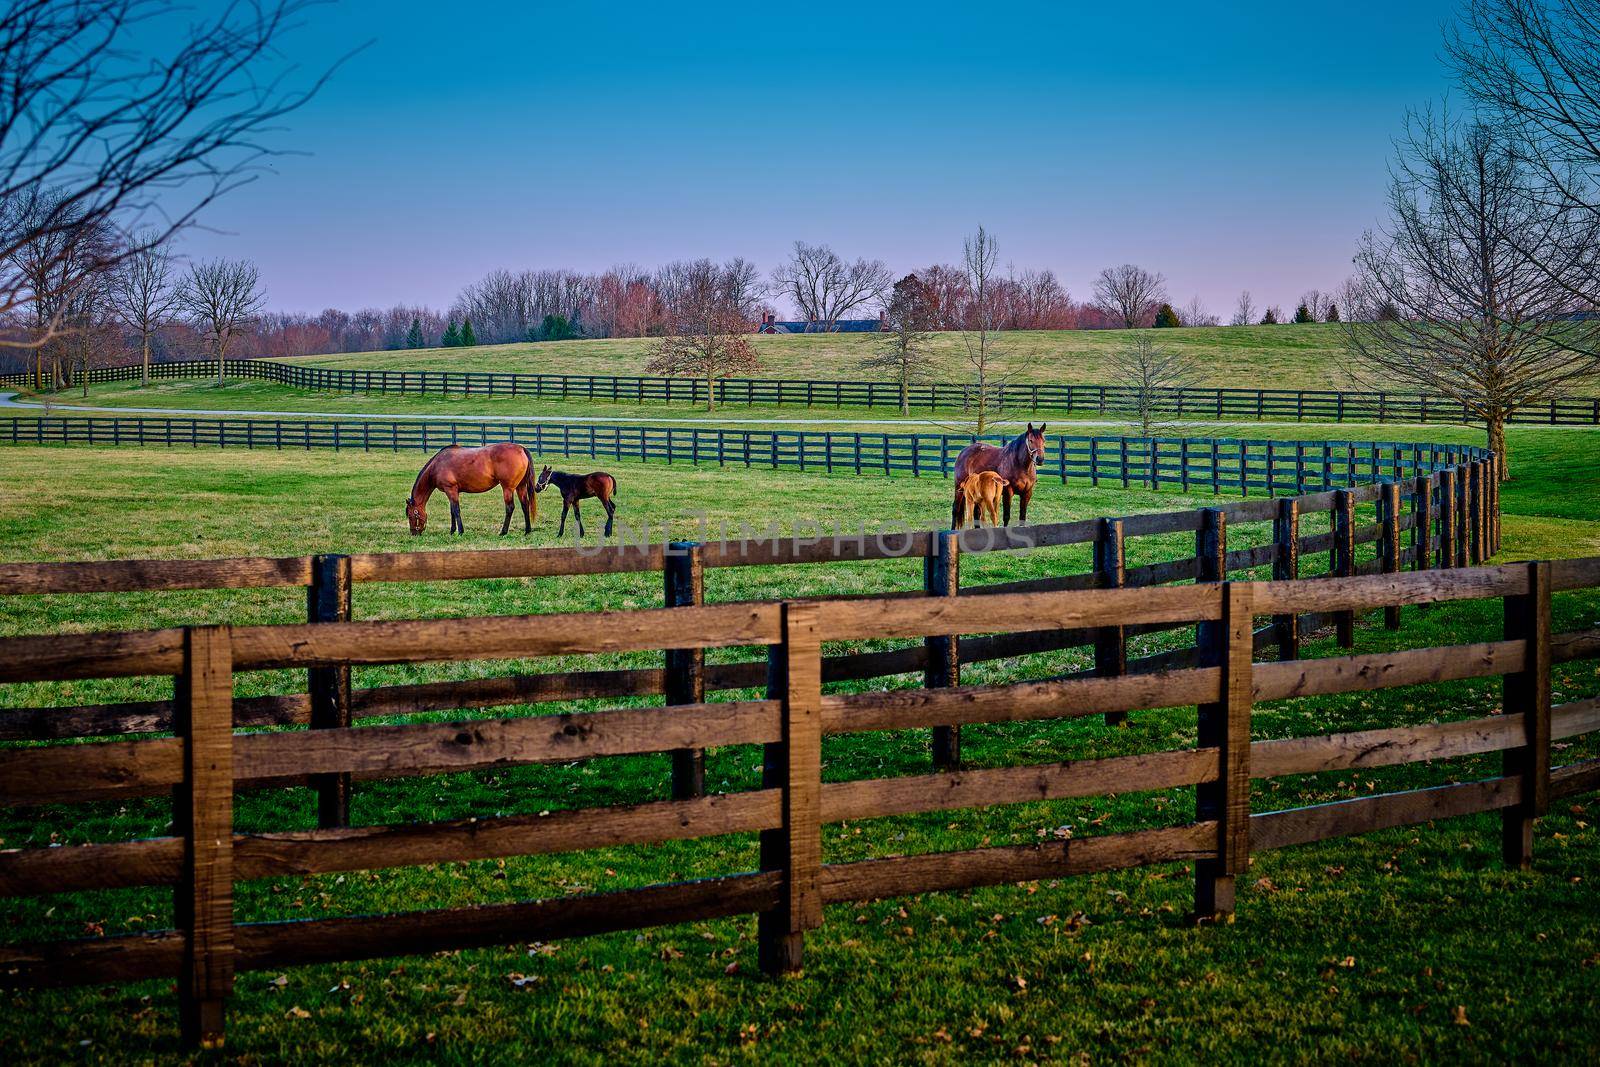 A pair of mares and foals grazing on early spring grass at a thoroughbred farm. by patrickstock